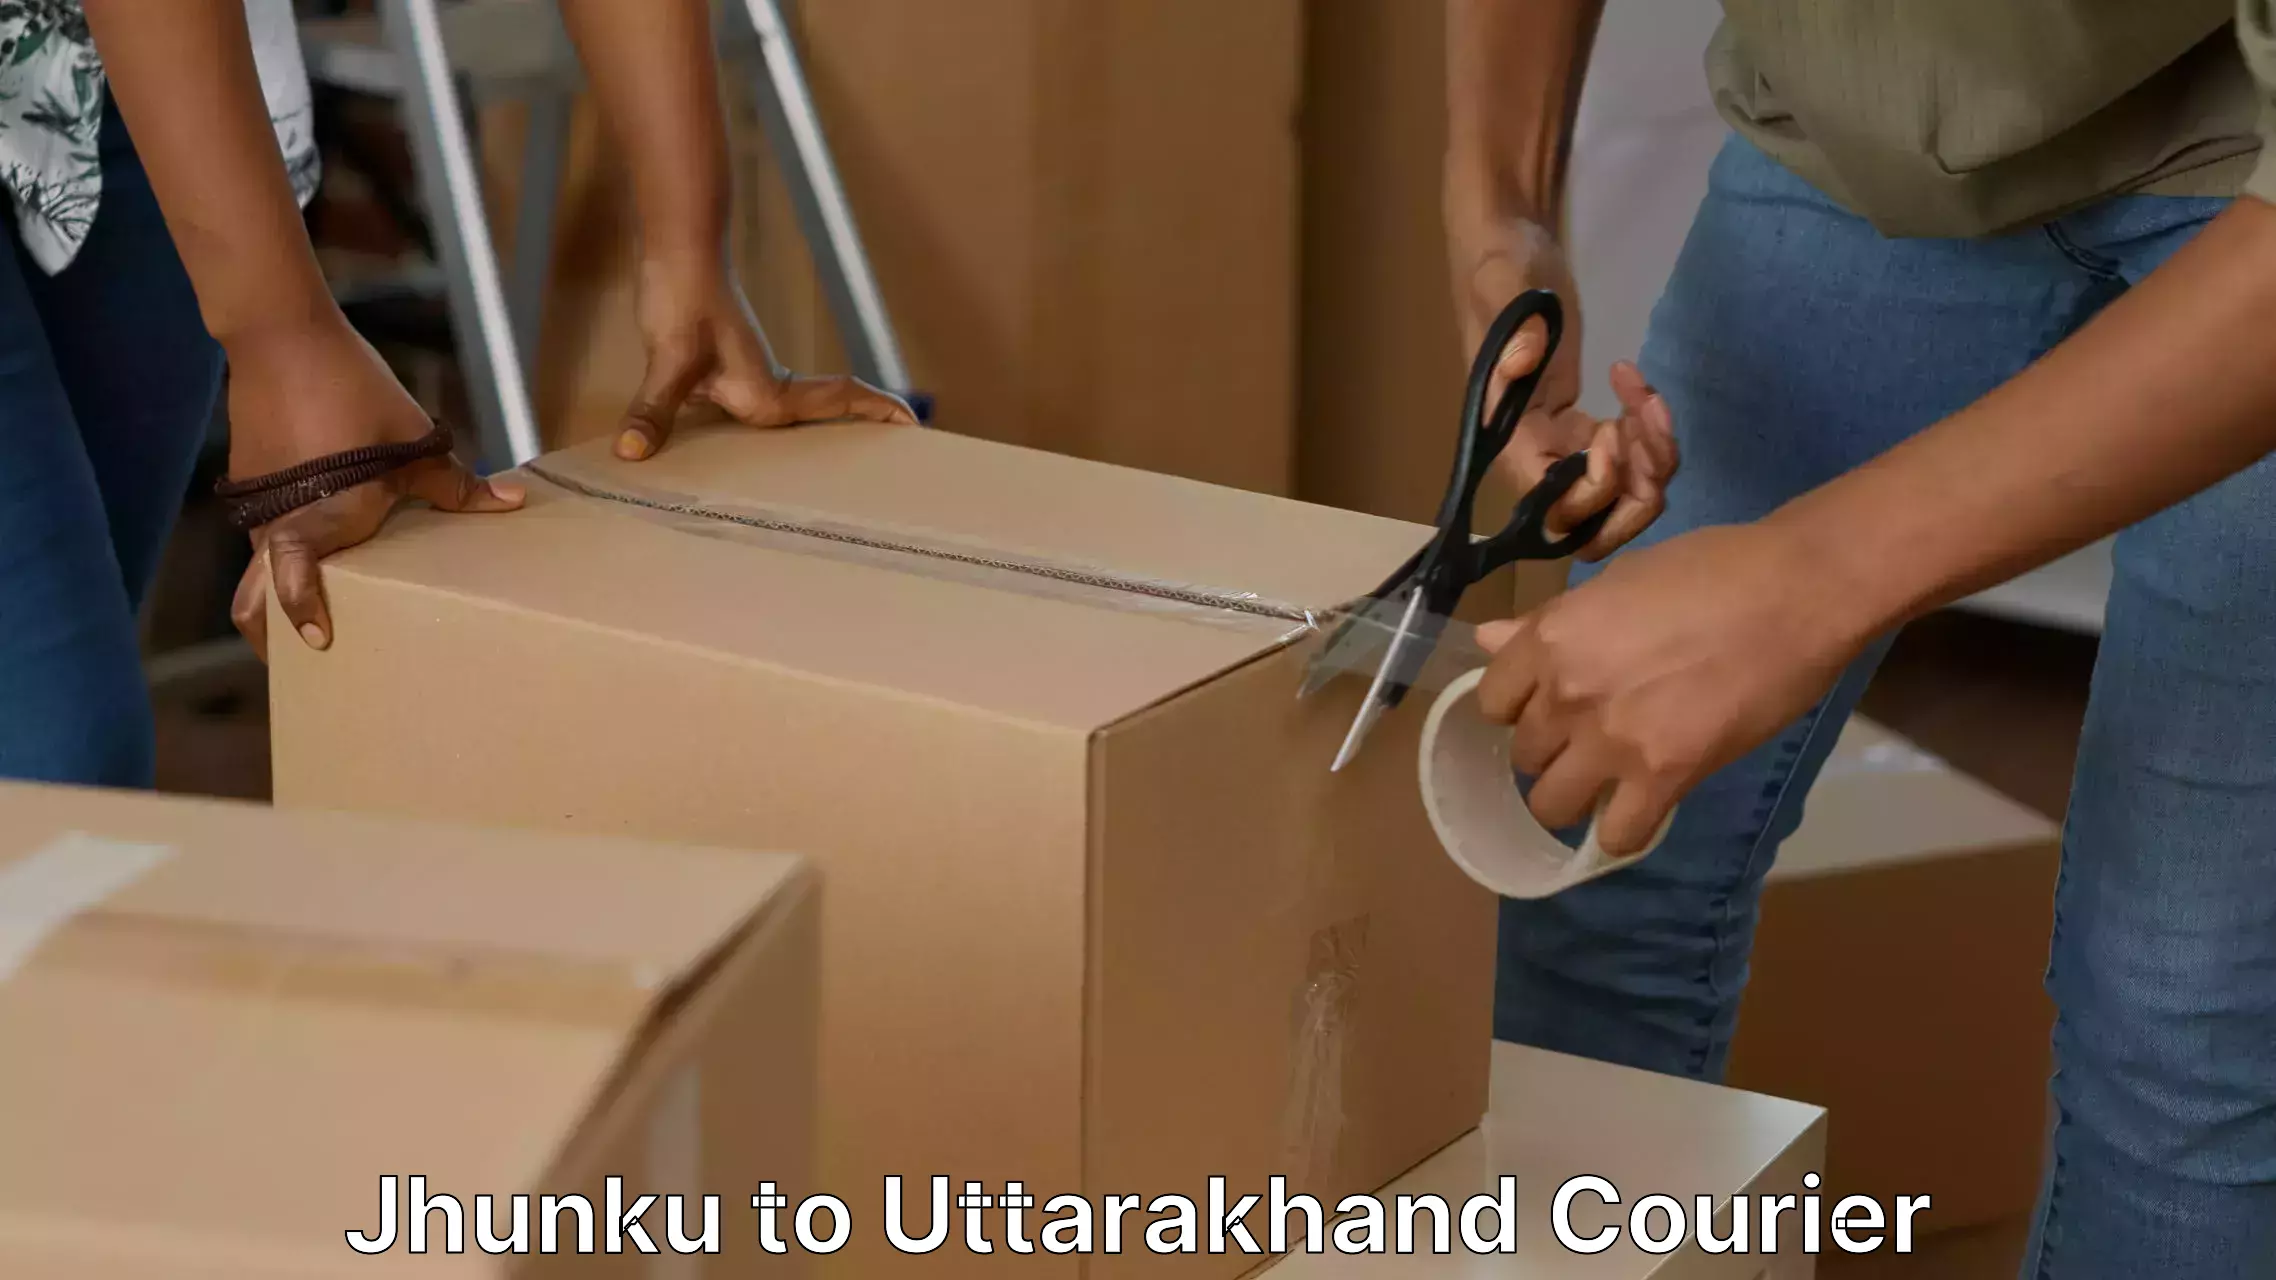 Full-service movers in Jhunku to Kashipur